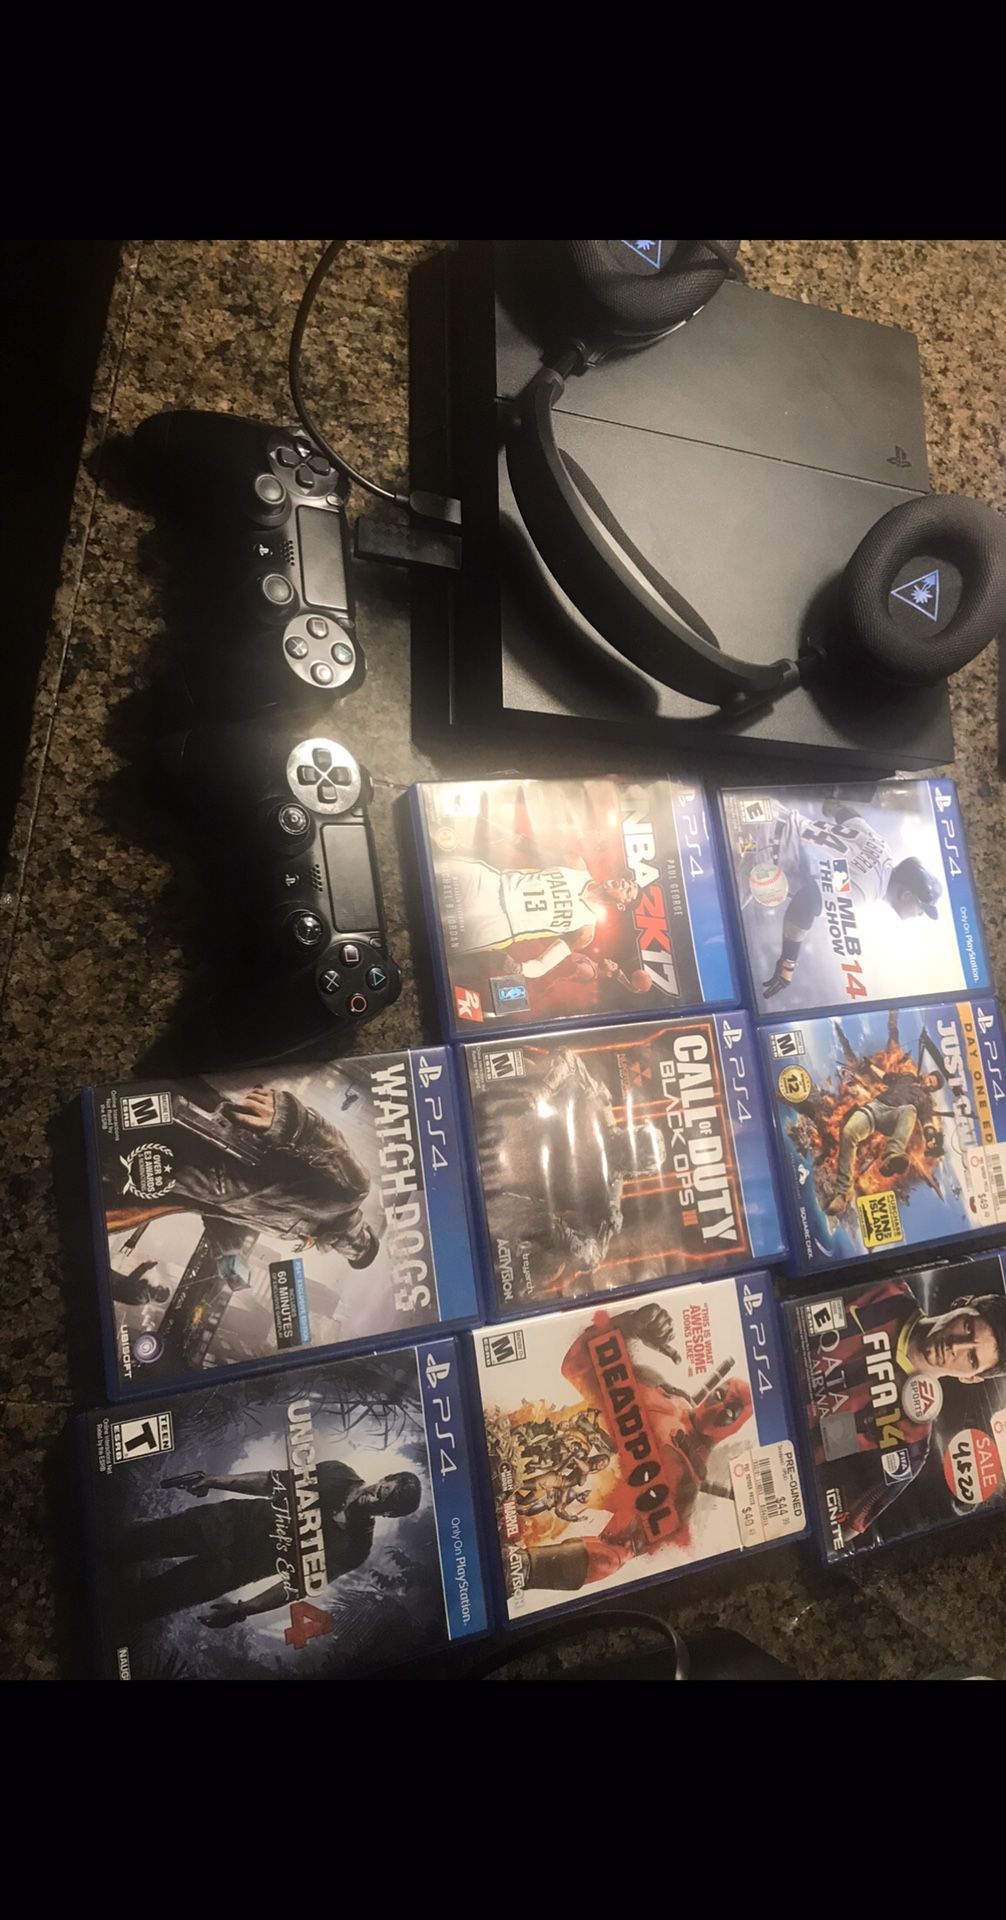 PS4, 8 games, two controller and headphones